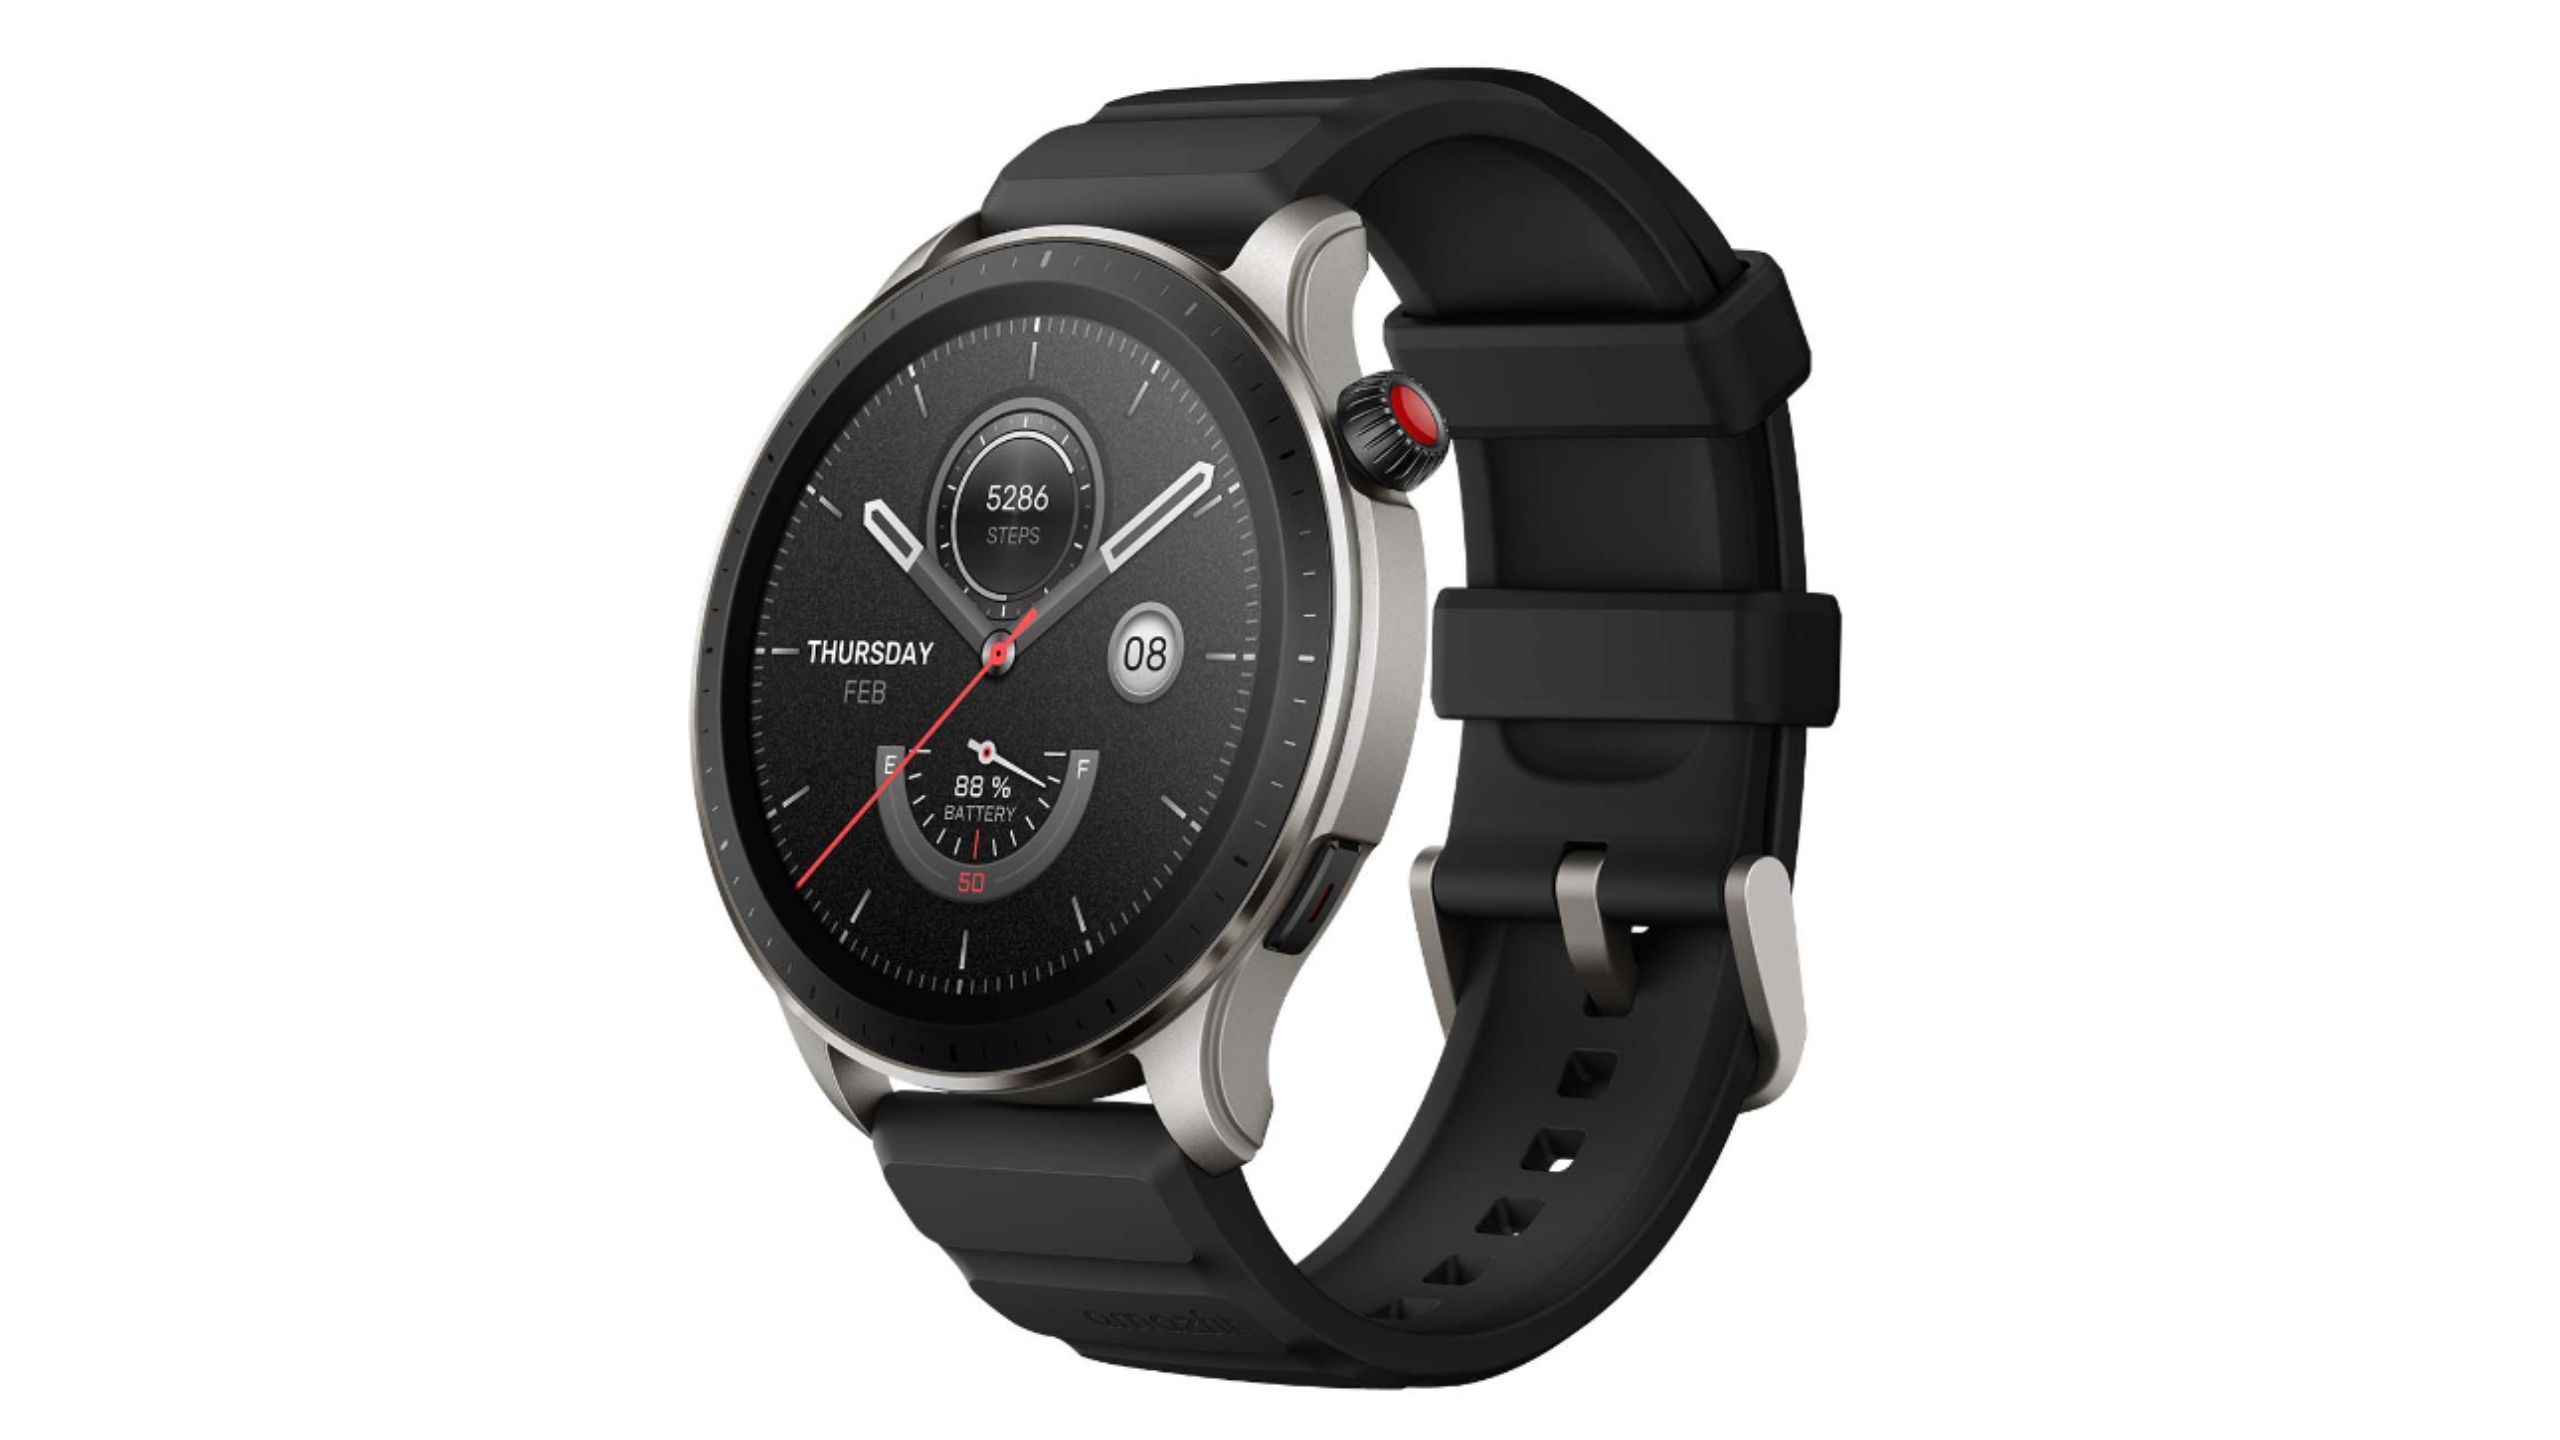 Amazfit Official Online Store, February 2024